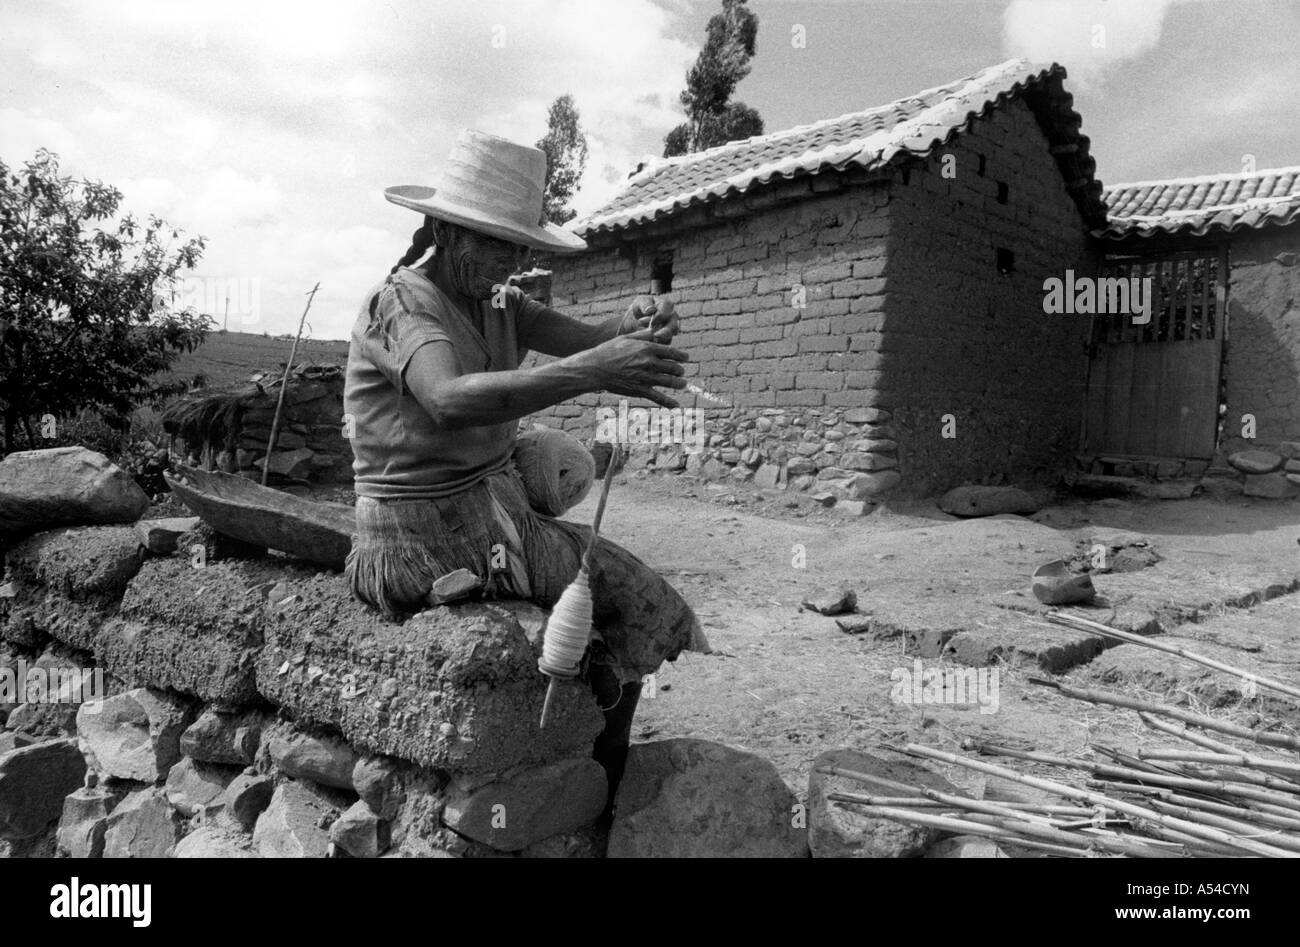 Painet hn1914 502 black and white labor woman spinning wool cohcabamba bolivia country developing nation less economically Stock Photo